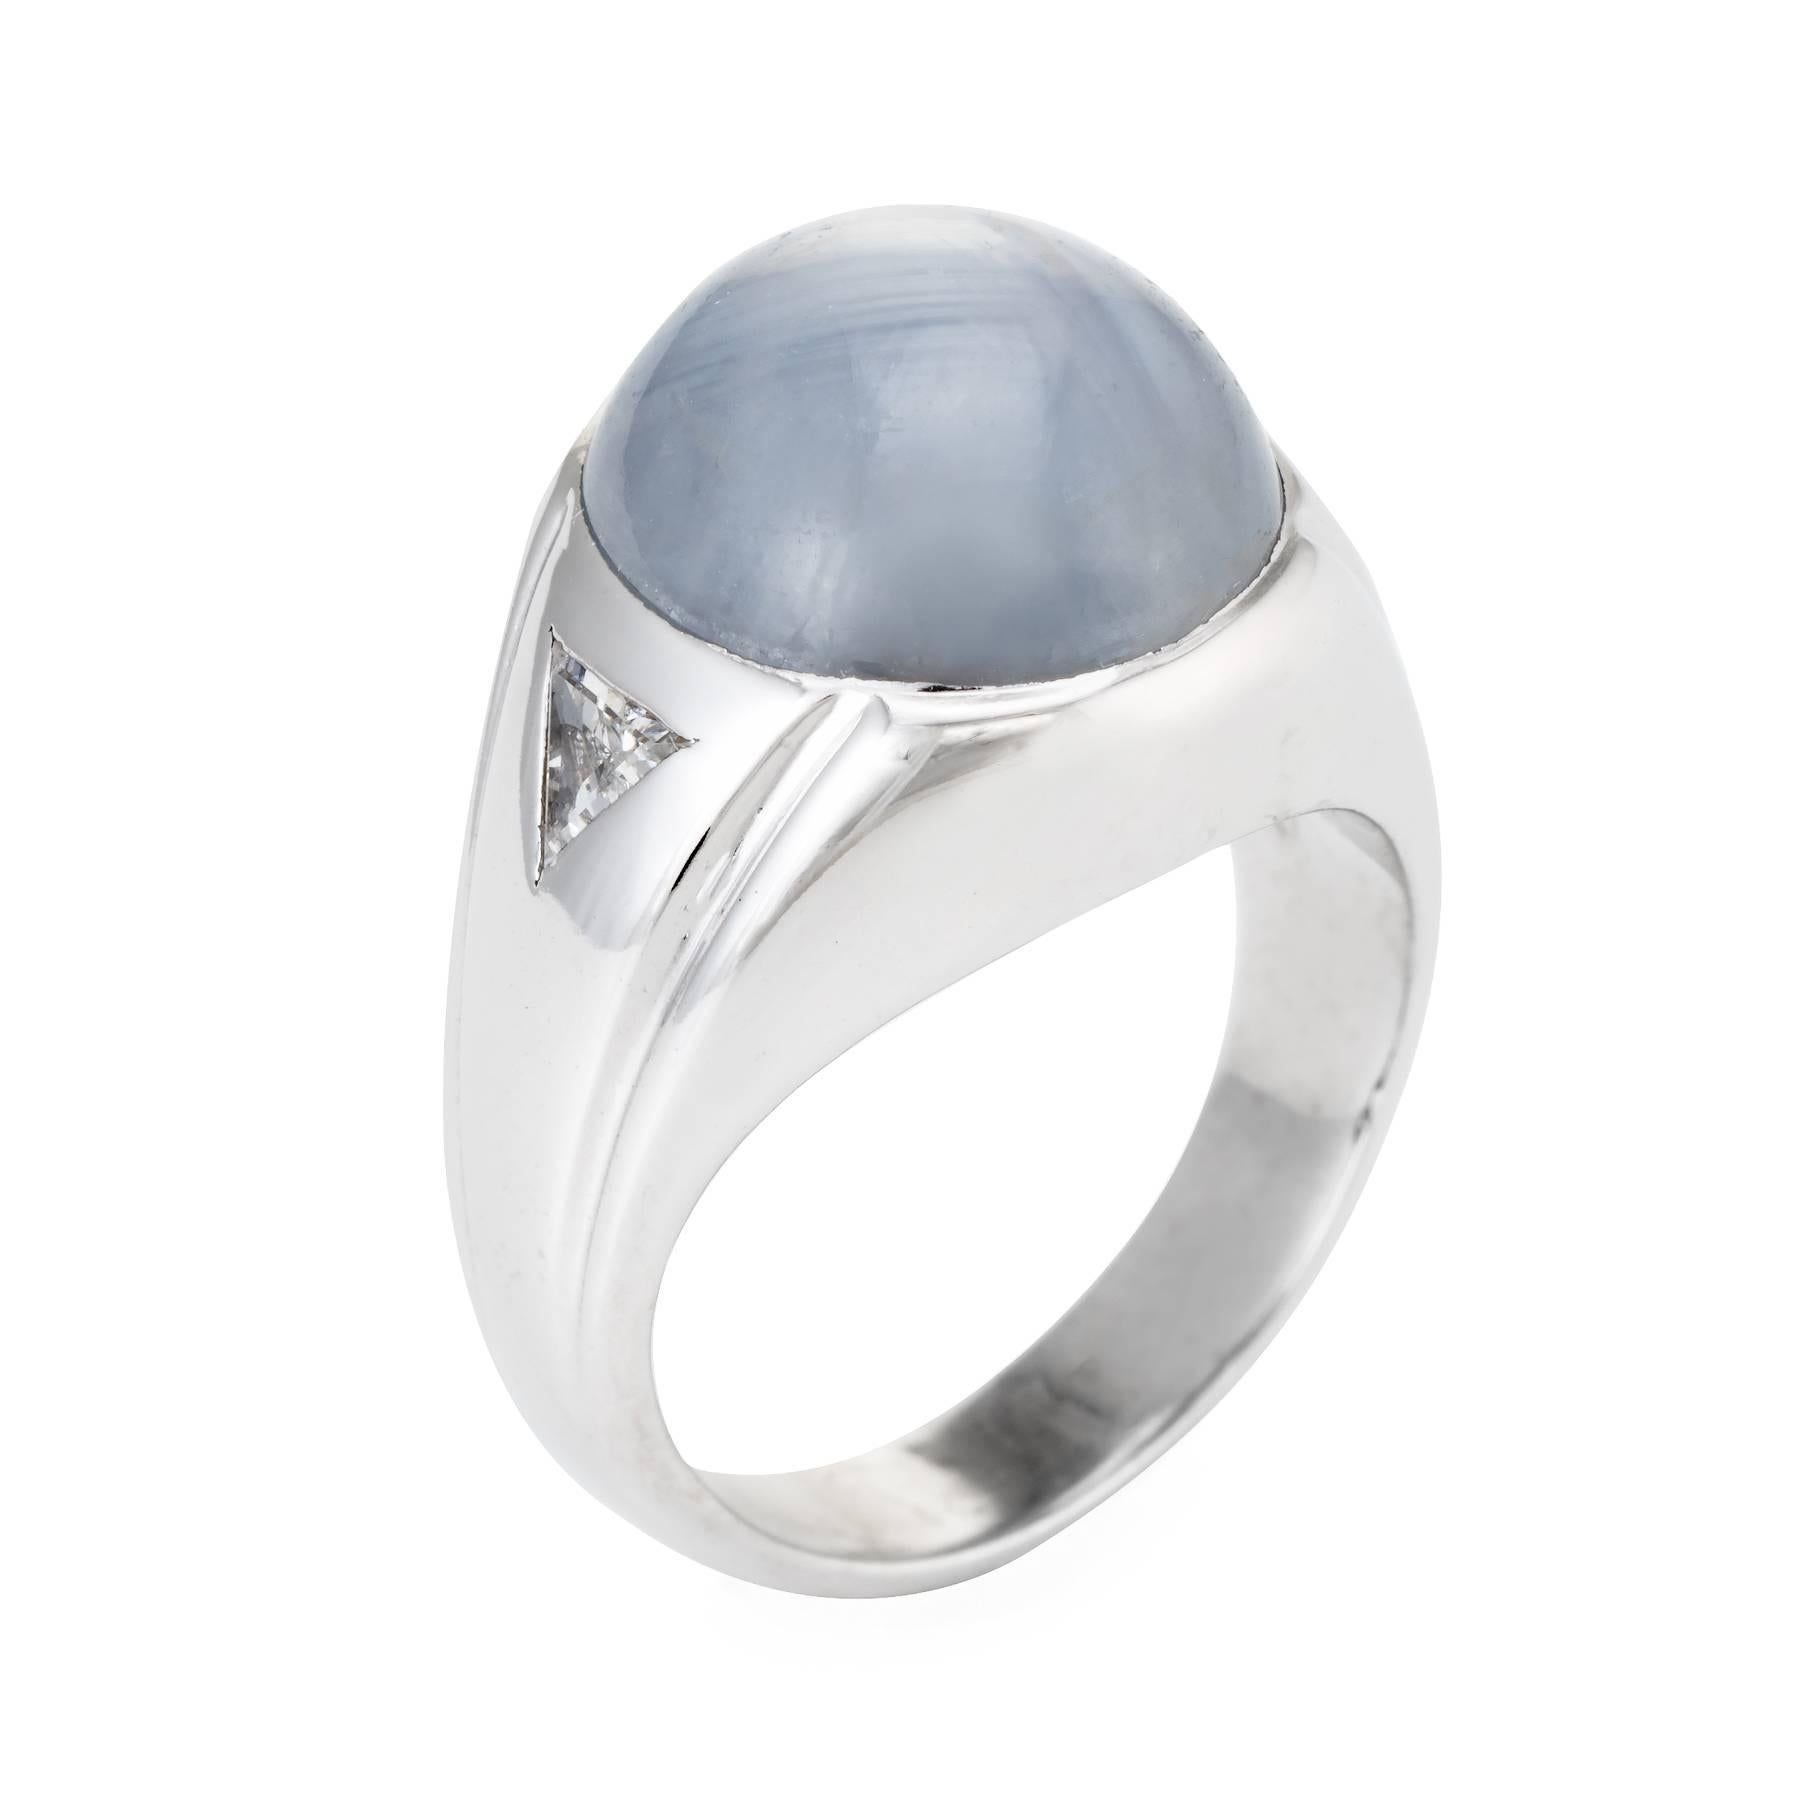 Finely detailed men's ring, crafted in 14 karat white gold. 

Oval cabochon cut natural star sapphire, approx. 17.60 carats (14.4 x 12.6 x 9.0mm), light gray color, moderately included, good cut, moderate star, Sri Lanka origin, not heated. The